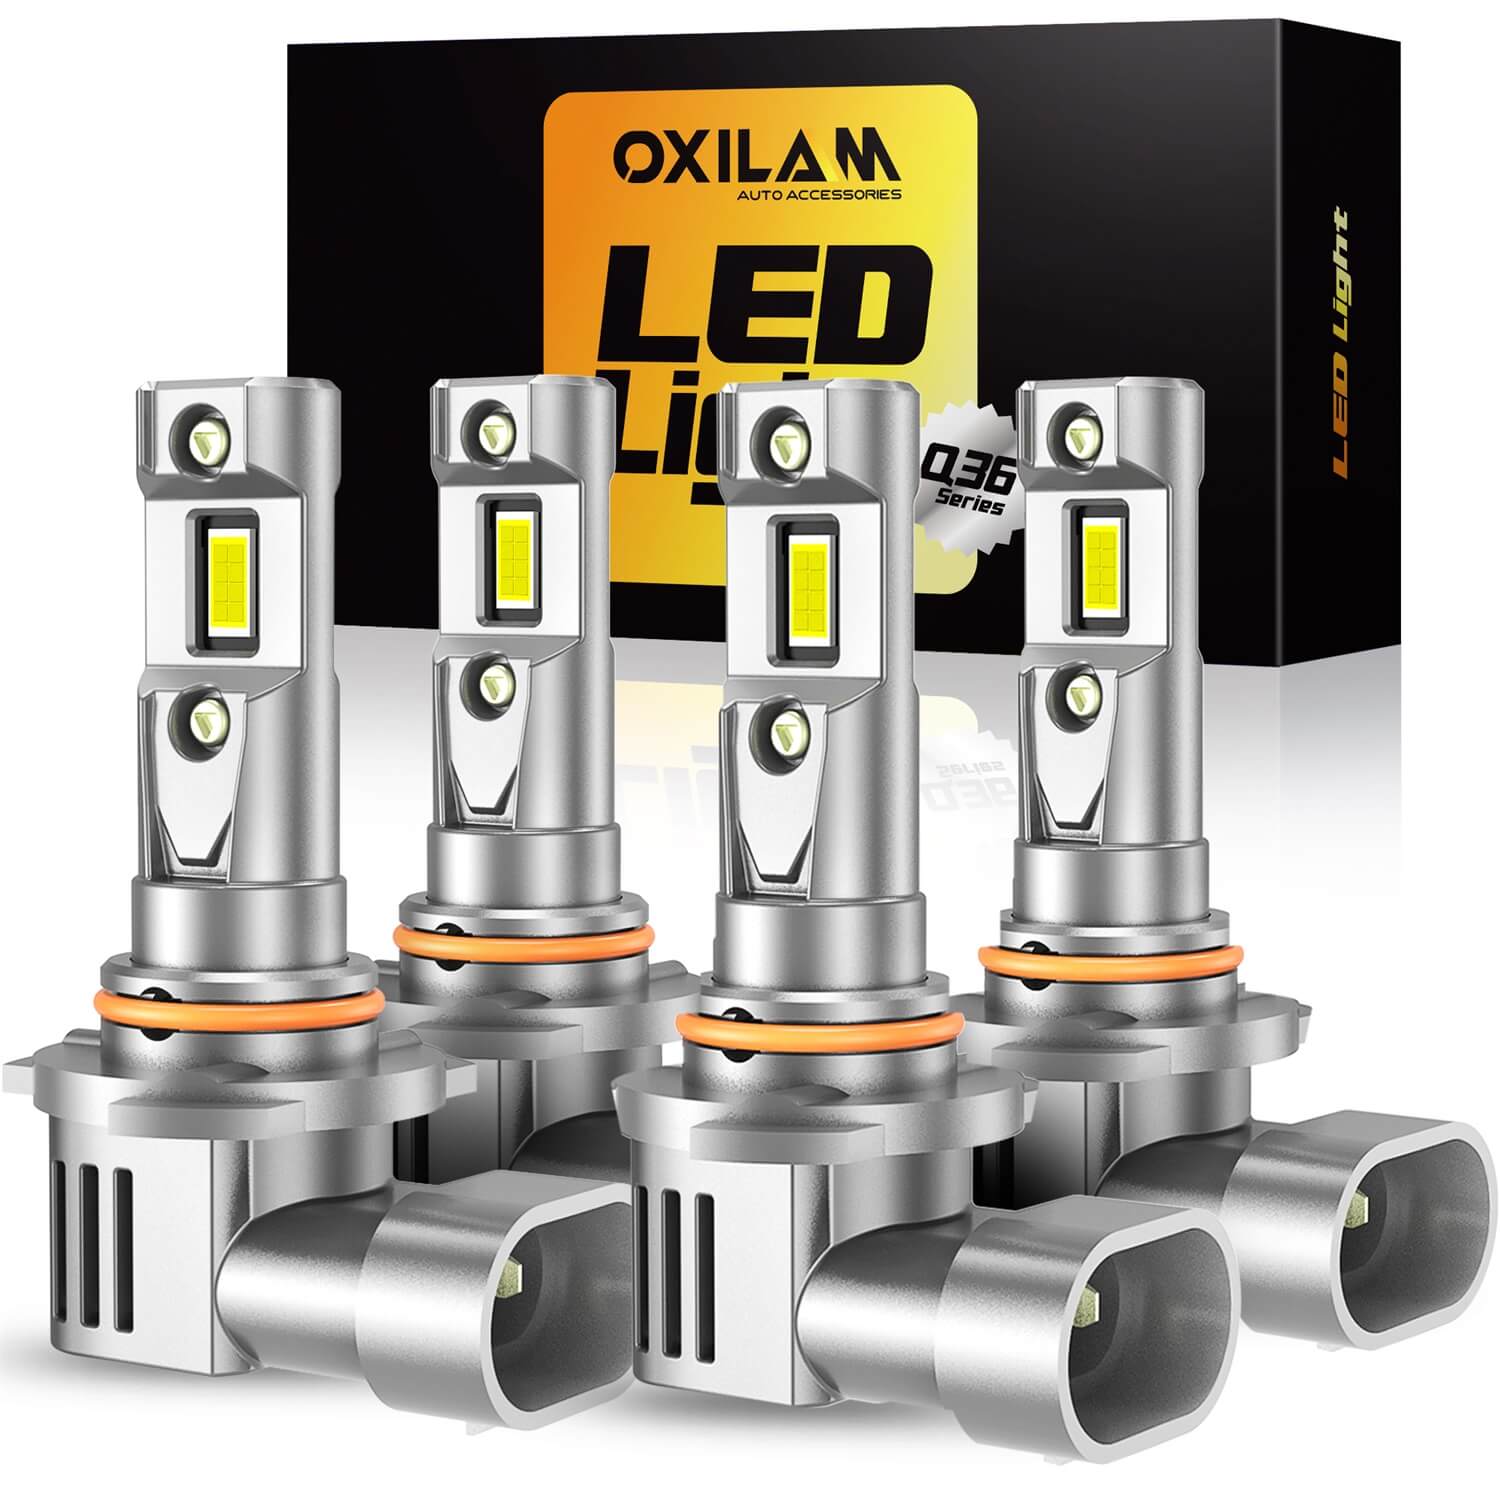 Oxilam OXILAM Upgraded 9005 9006 LED Bulbs Combo, 1:1 Mini Size, 6500K, Canbus Ready, Pack of 4